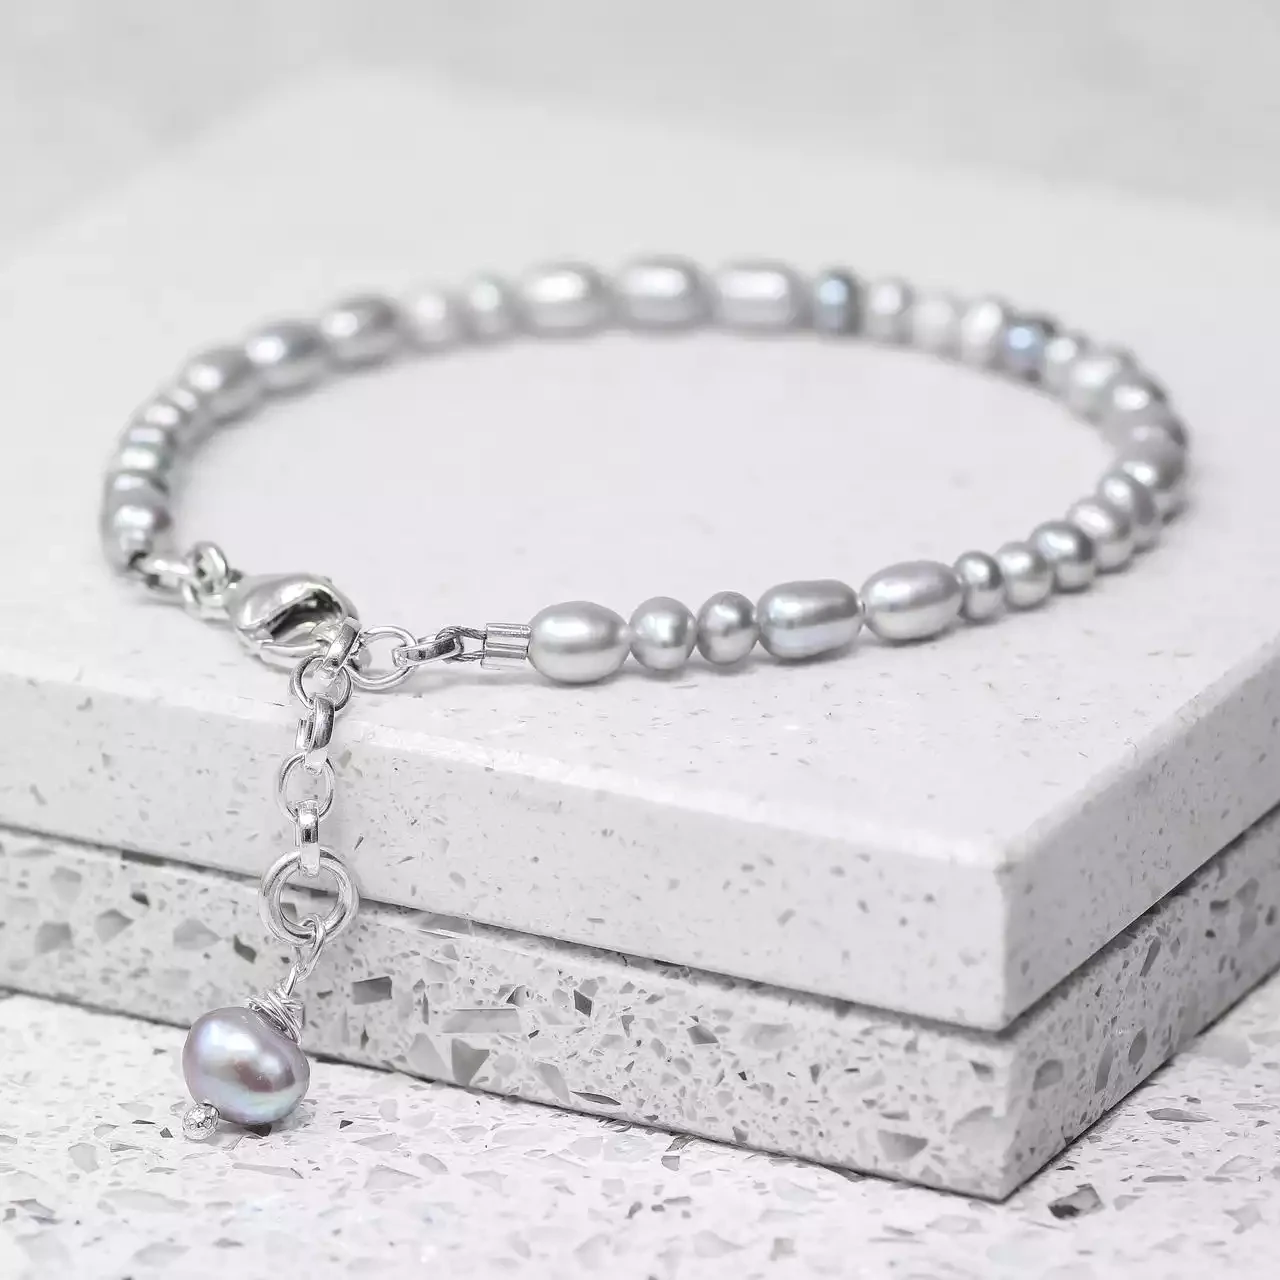 Silver Pearl Bracelet With Charm - Small by Fi Mehra